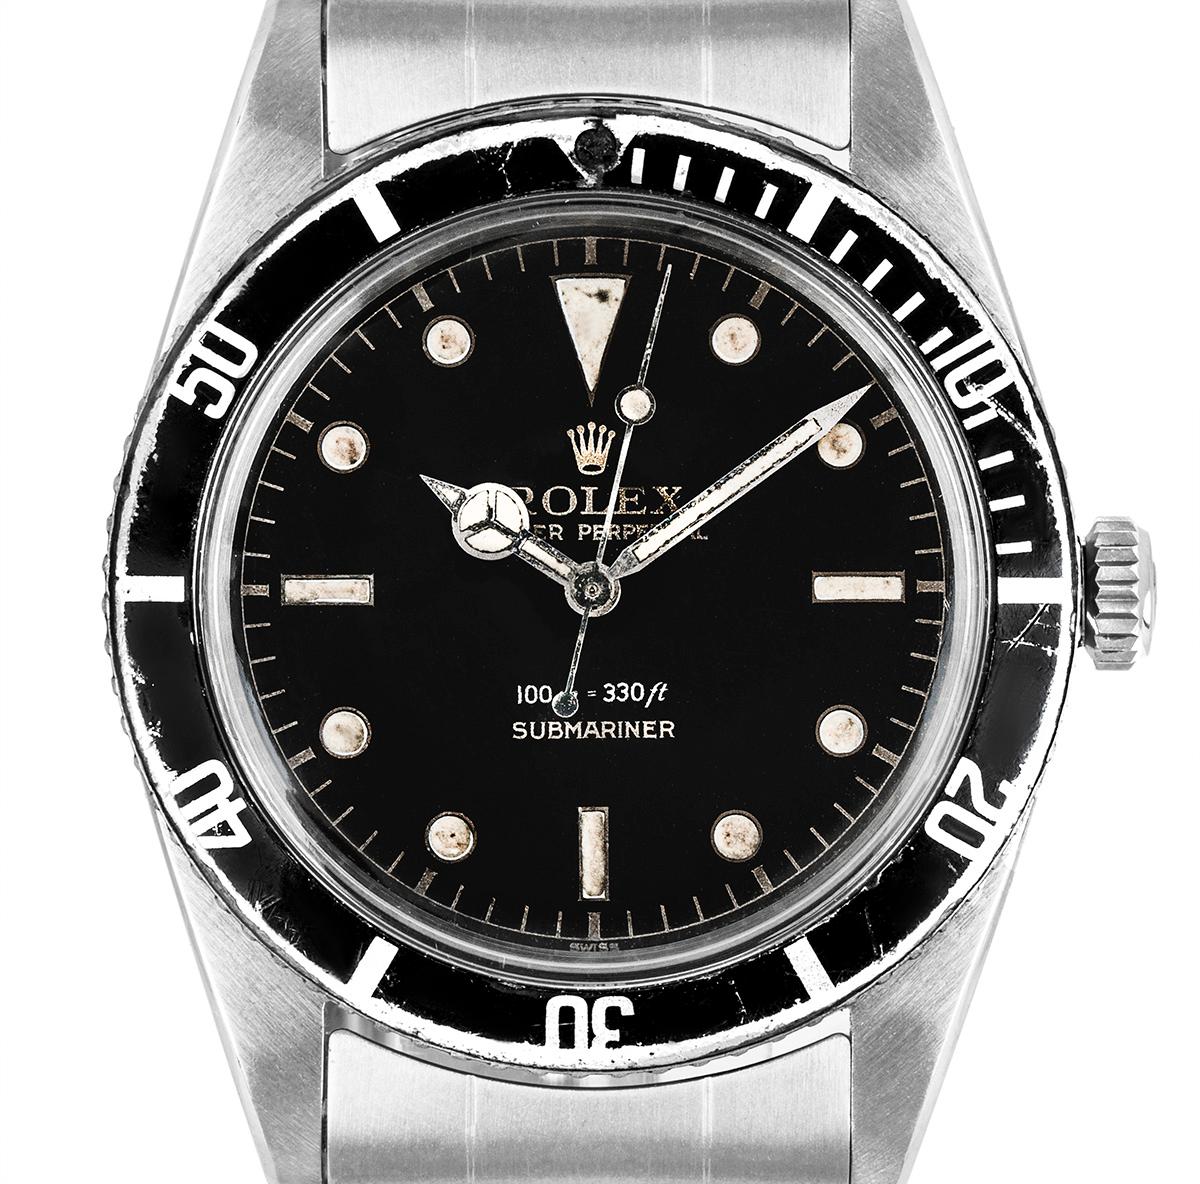 A vintage Rolex Submariner Non-Date. Featuring a black dial with applied hour markers and a stainless steel bi-directional rotating bezel. Fitted with a plastic glass and a self-winding automatic movement. The watch is also equipped with a stainless